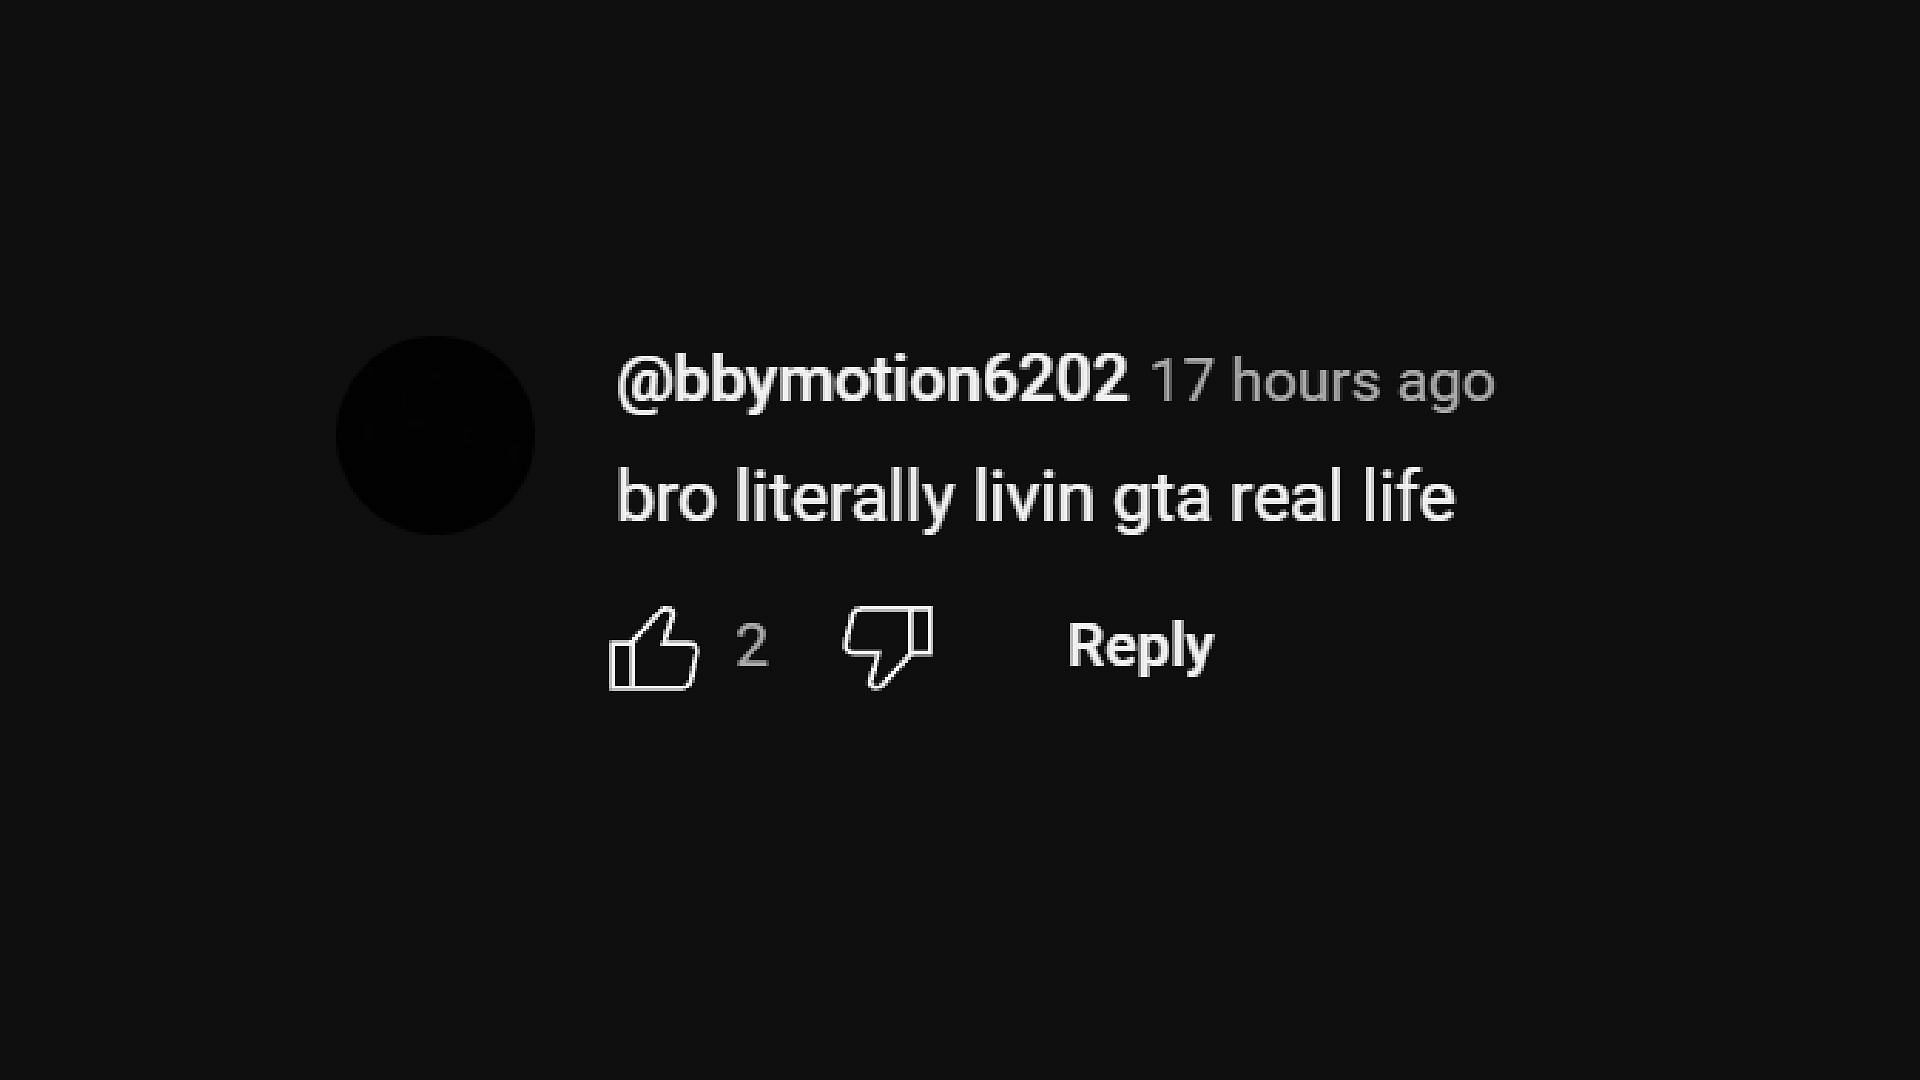 Fans state that the streamer is living the GTA experience in real life. (Image via Legend/YouTube)